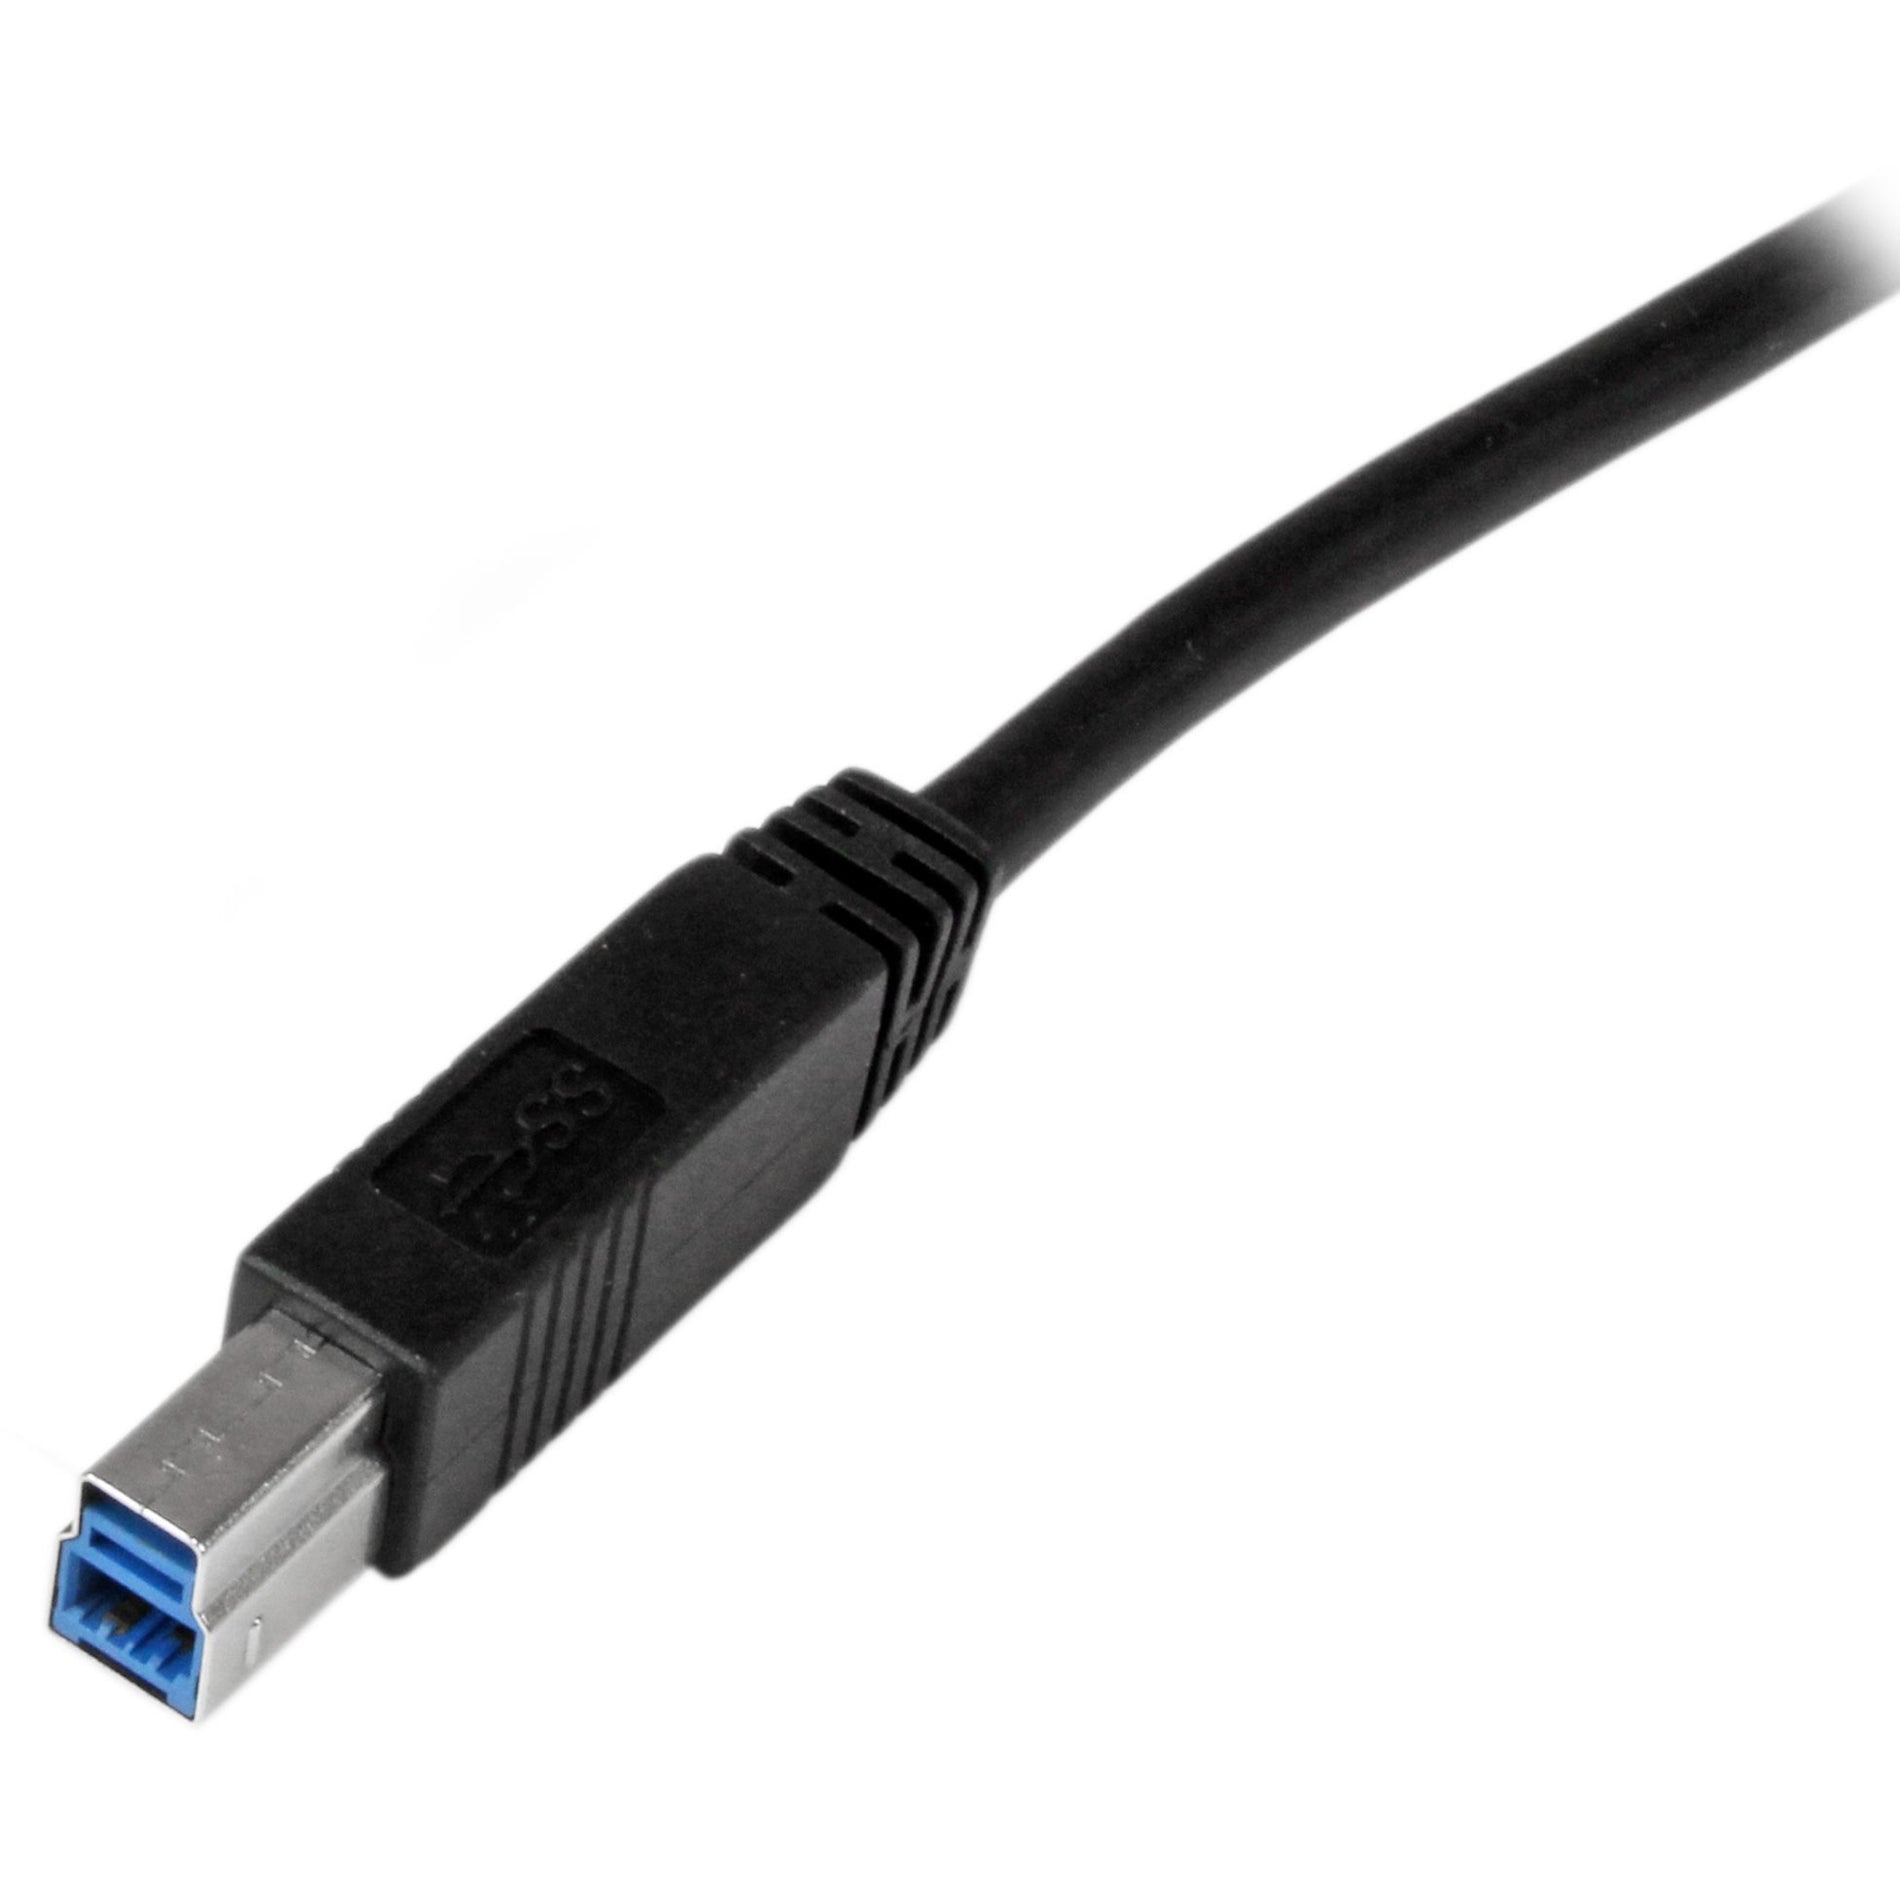 StarTech.com USB3CAB2M 2m Certified SuperSpeed USB 3.0 A to B Cable - M/M, 6 ft Data Transfer Cable